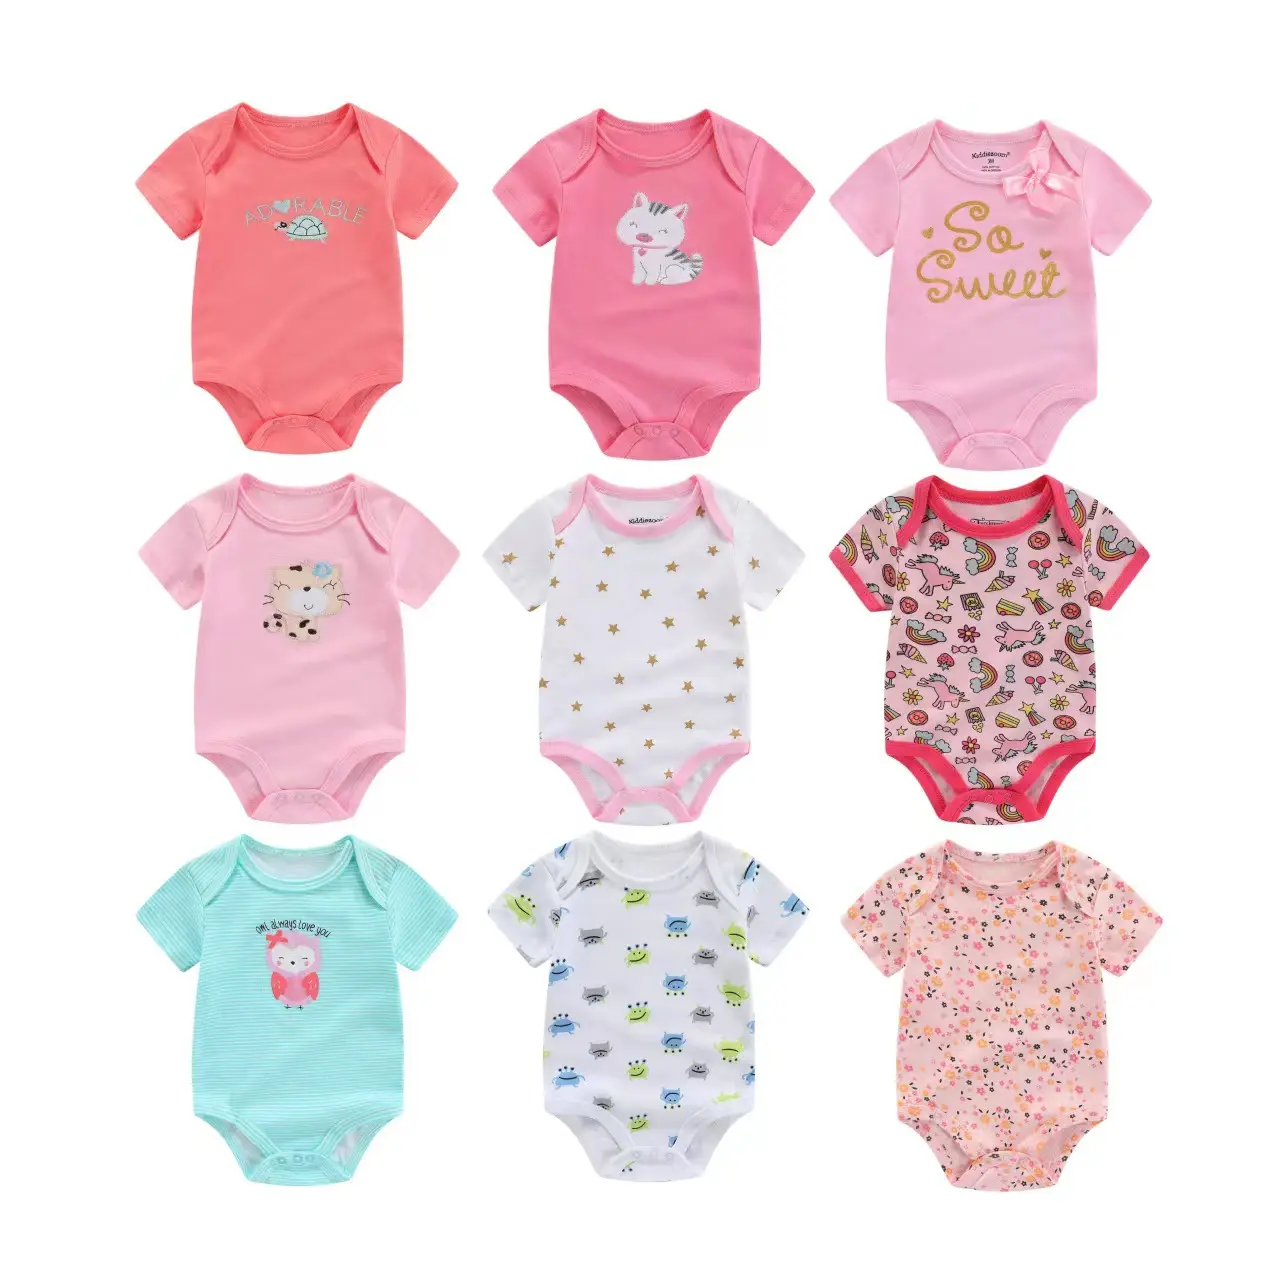 baby rompers best quality knitted rompers baby clothes clothing shipped randomly vest bodysuits jumpsuits